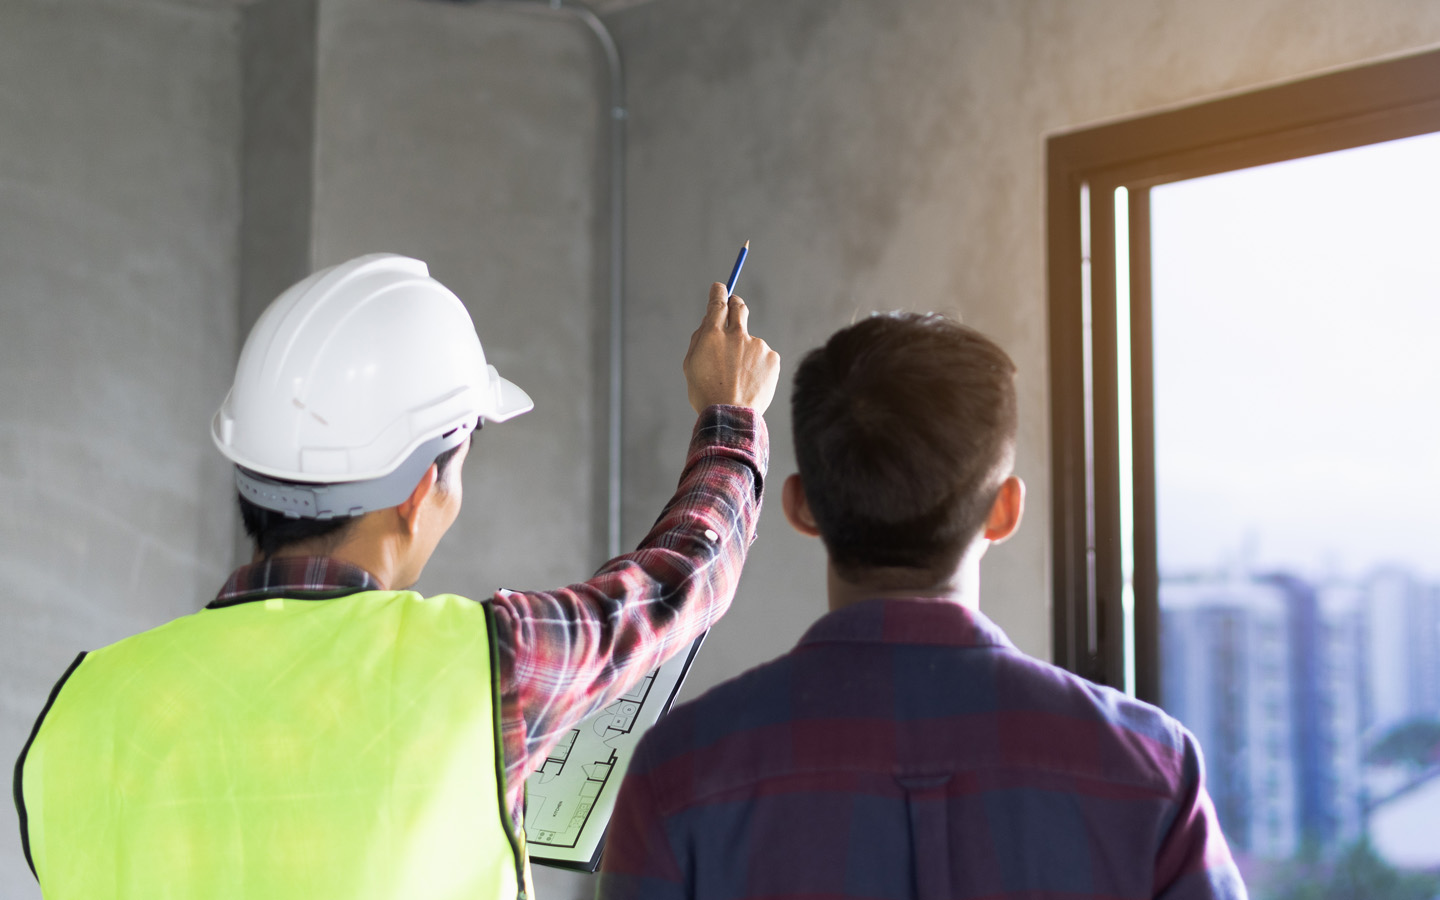 property inspection services in Abu Dhabi can help you get professional help and identify flaws in a property